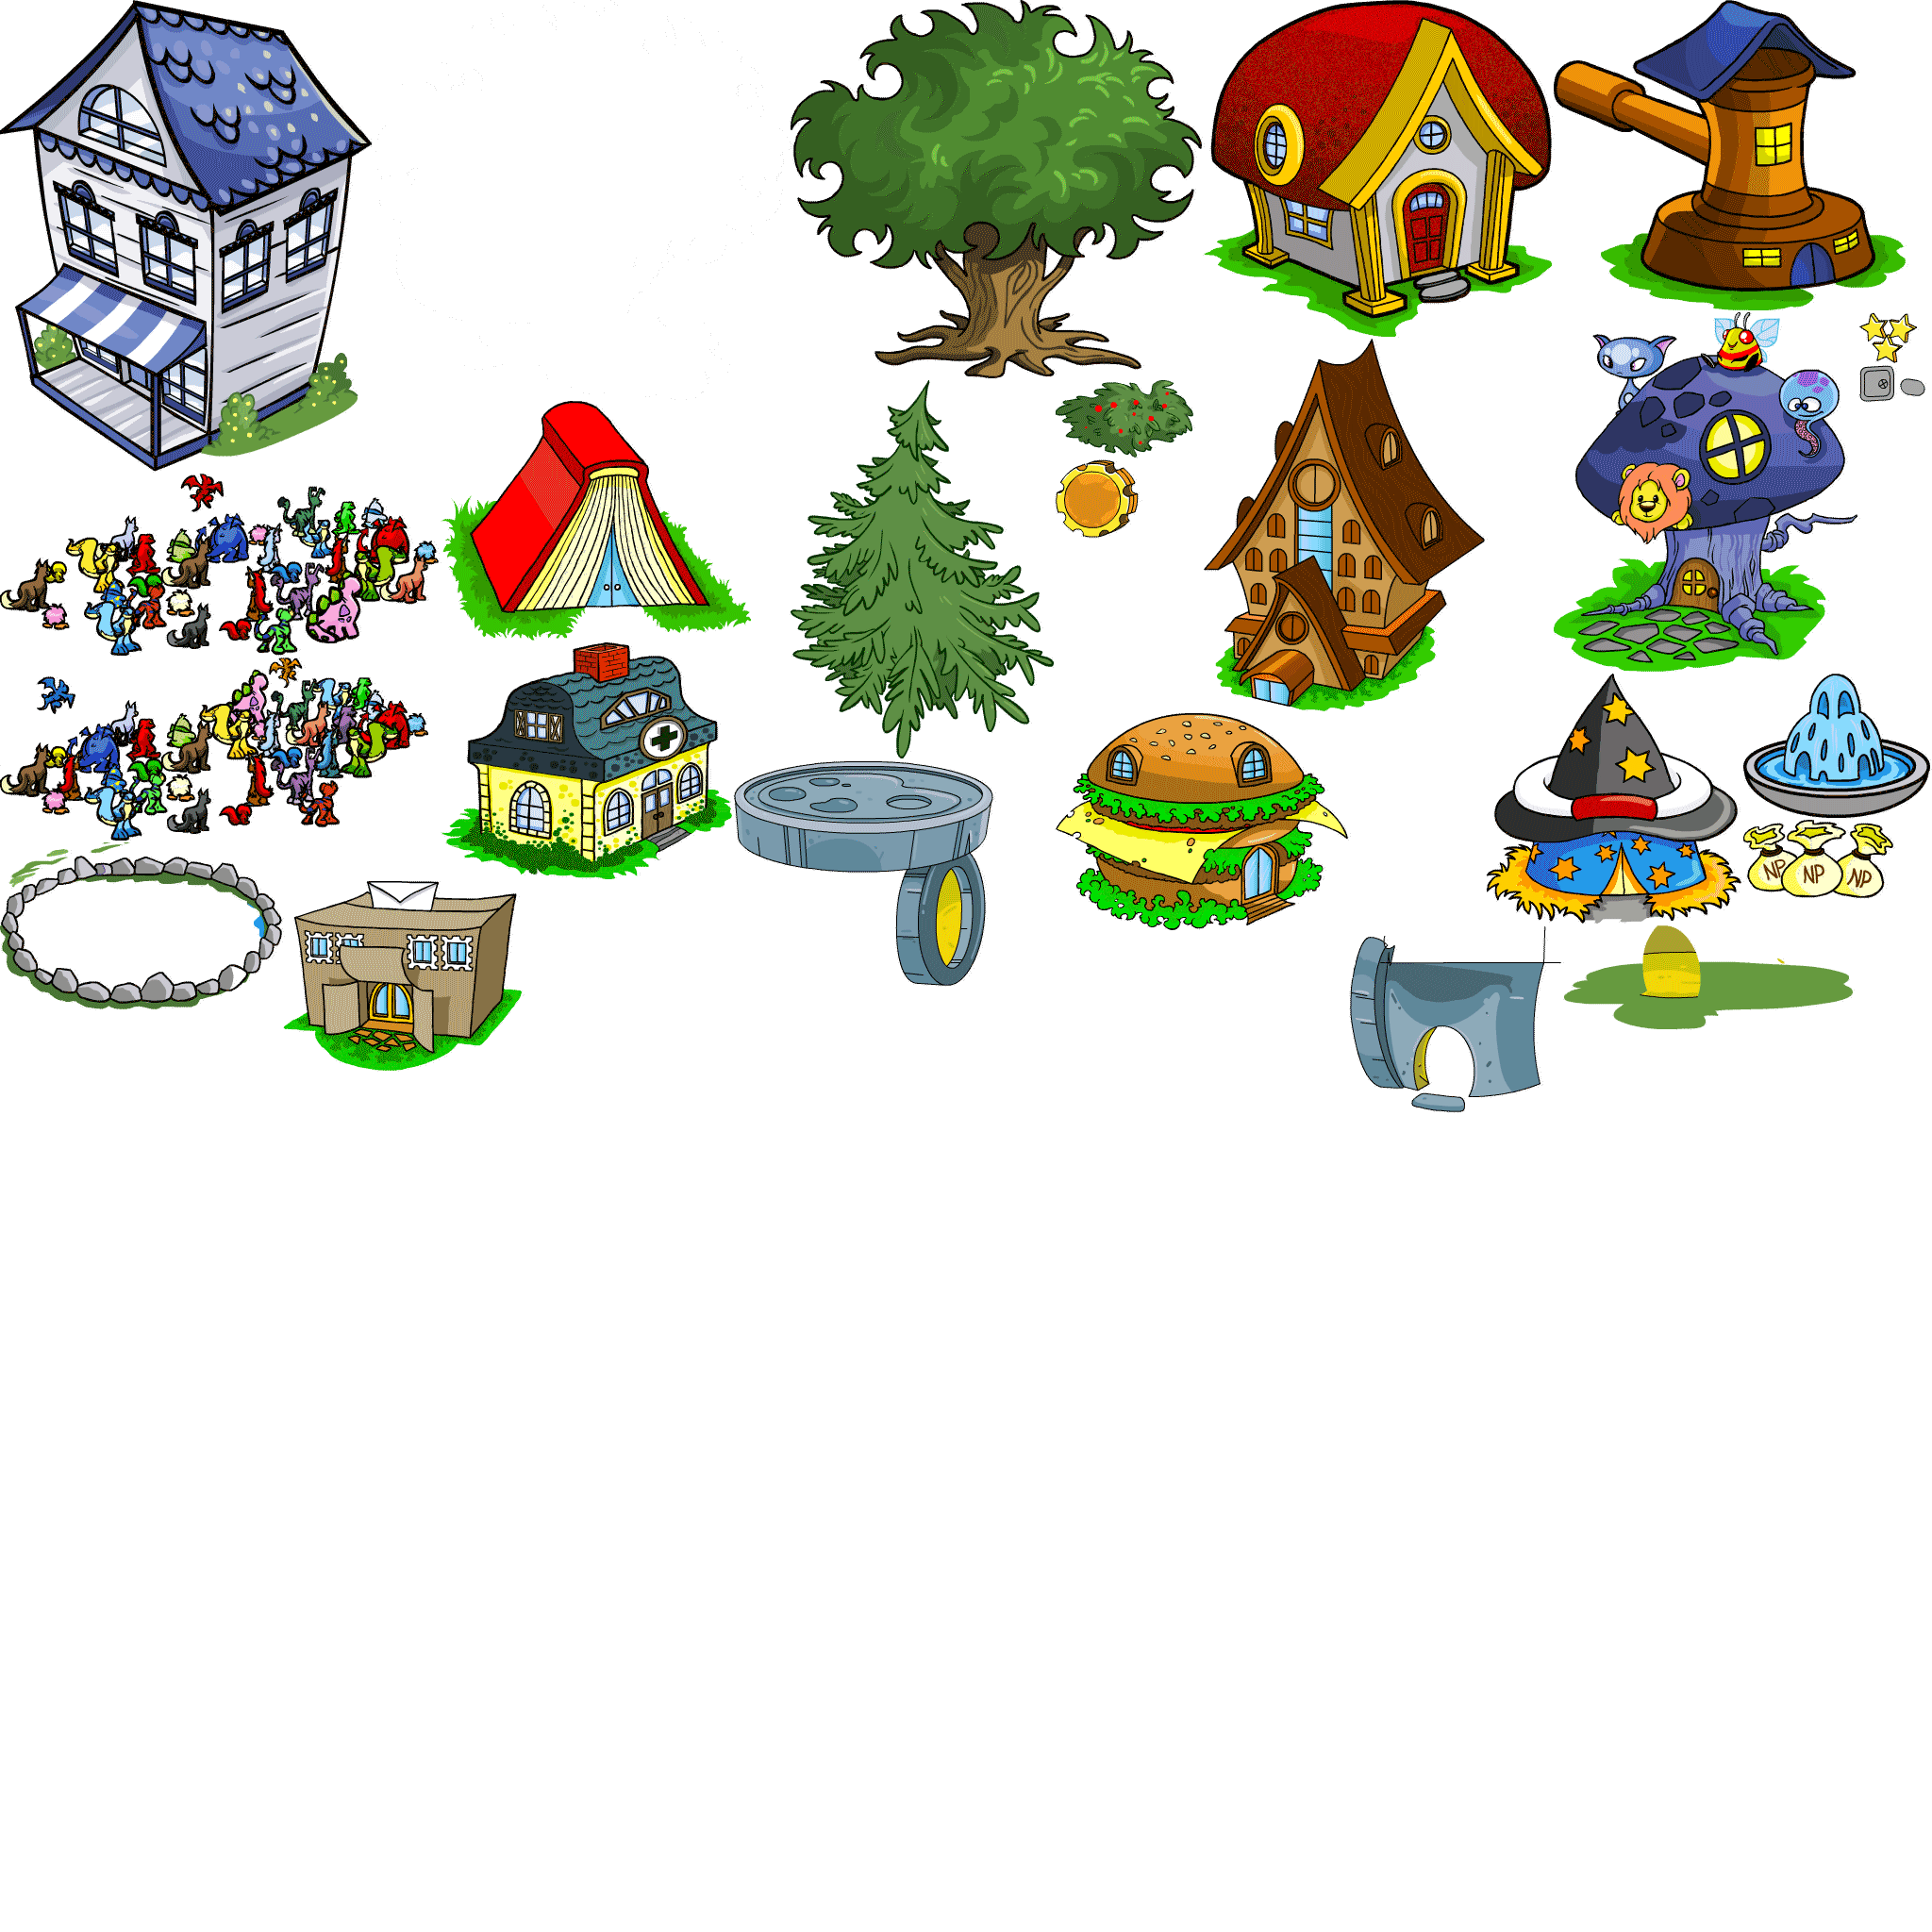 https://images.neopets.com/maps/objects/main/images/NeopiaCentral_HTML_Main_02h_atlas_1.png